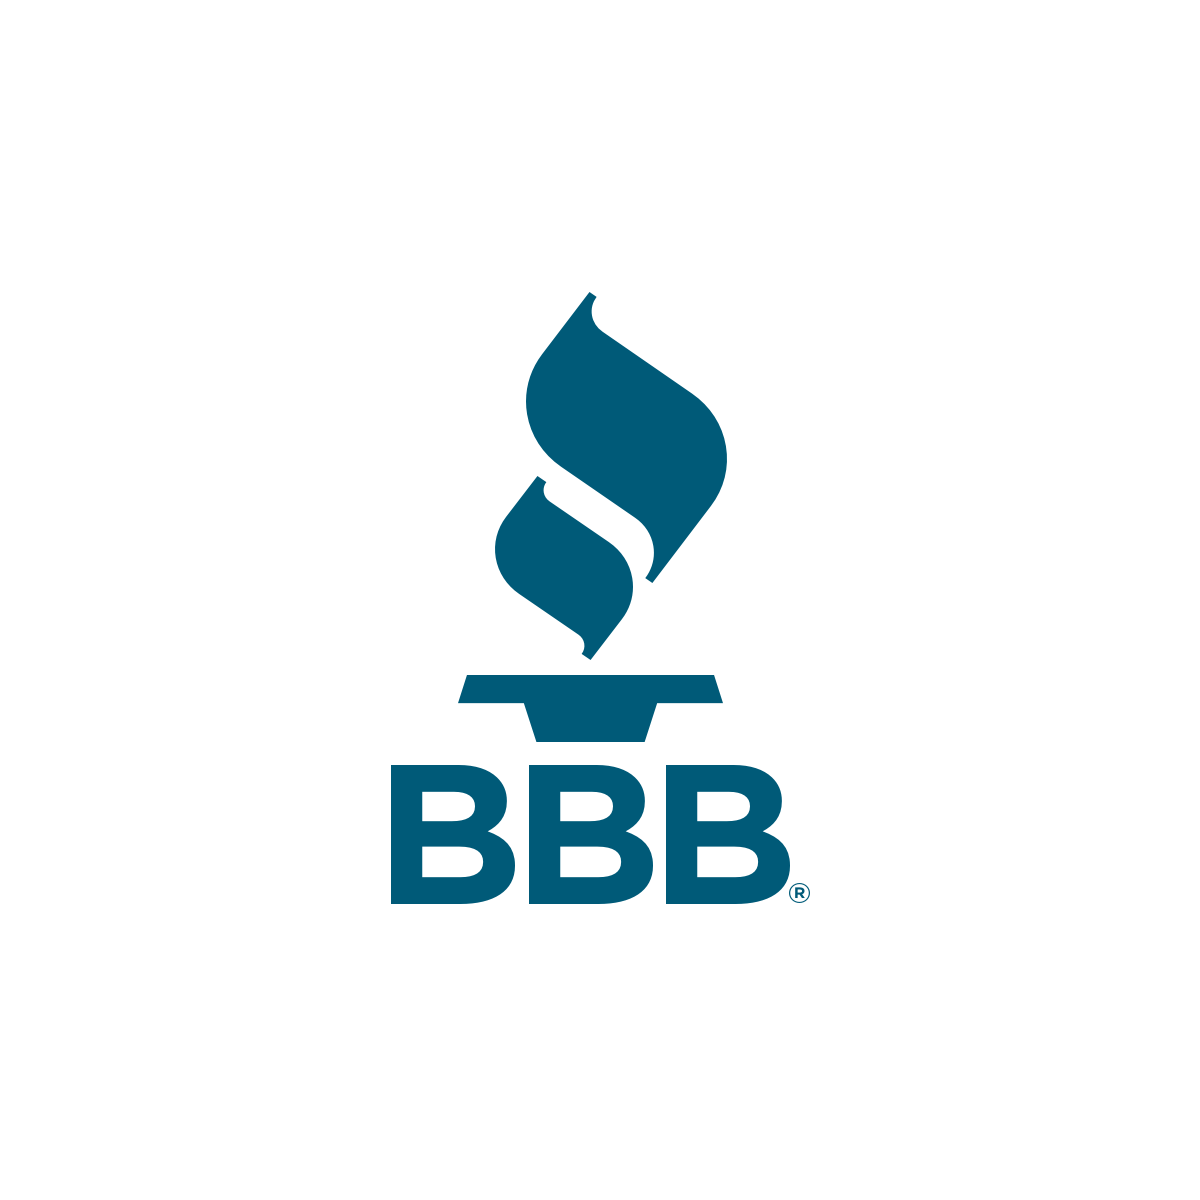 https://www.bbb.org/TerminusContent/_shared/images/logo_square.png